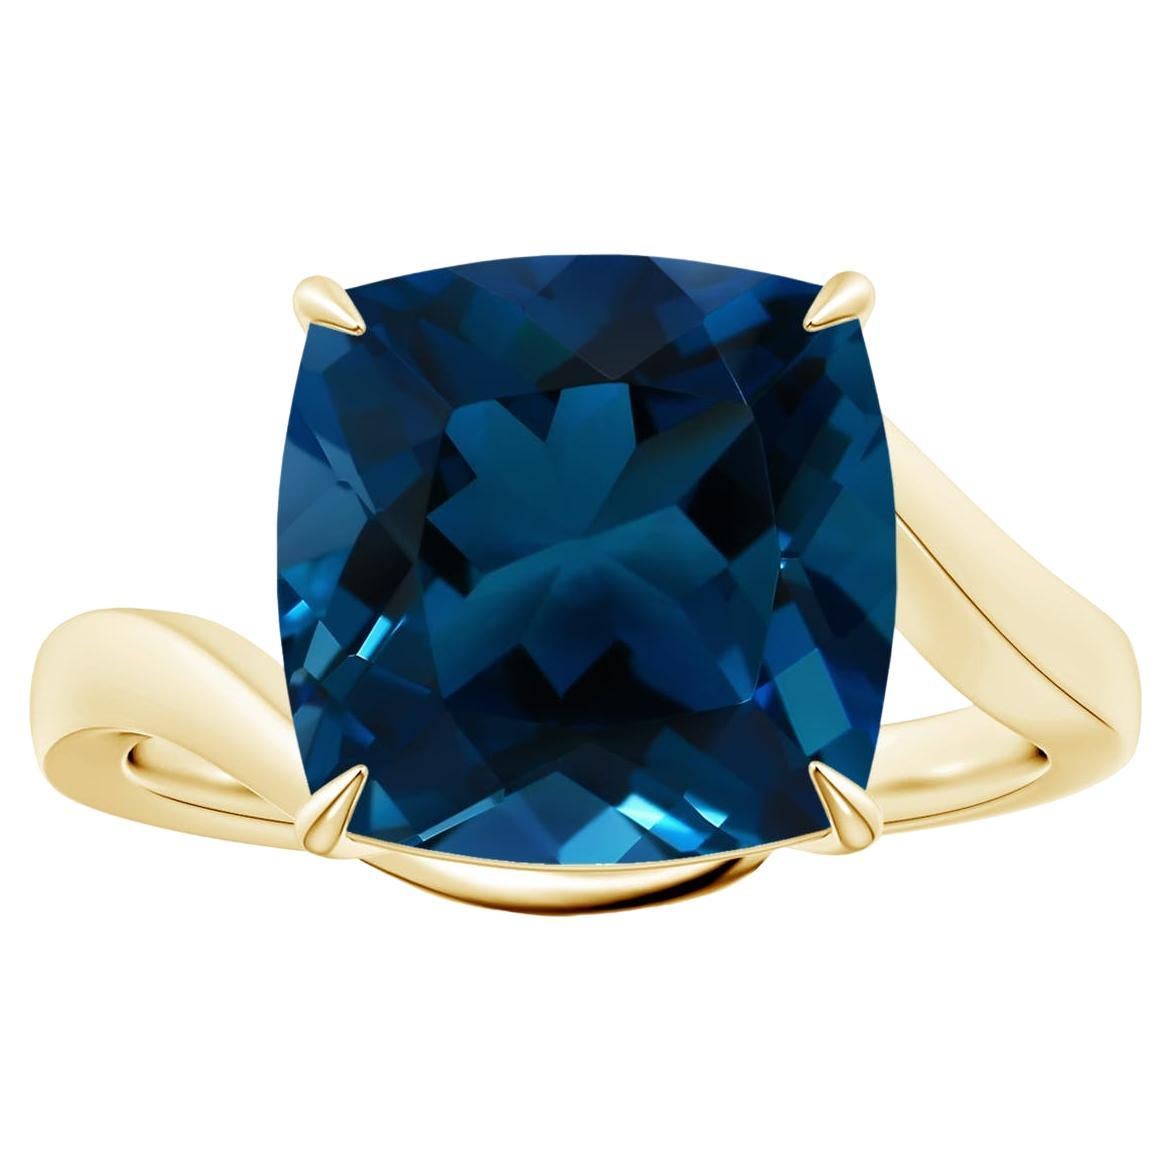 ANGARA GIA Certified Natural Solitaire London Blue Topaz Ring in 18K Yellow Gold